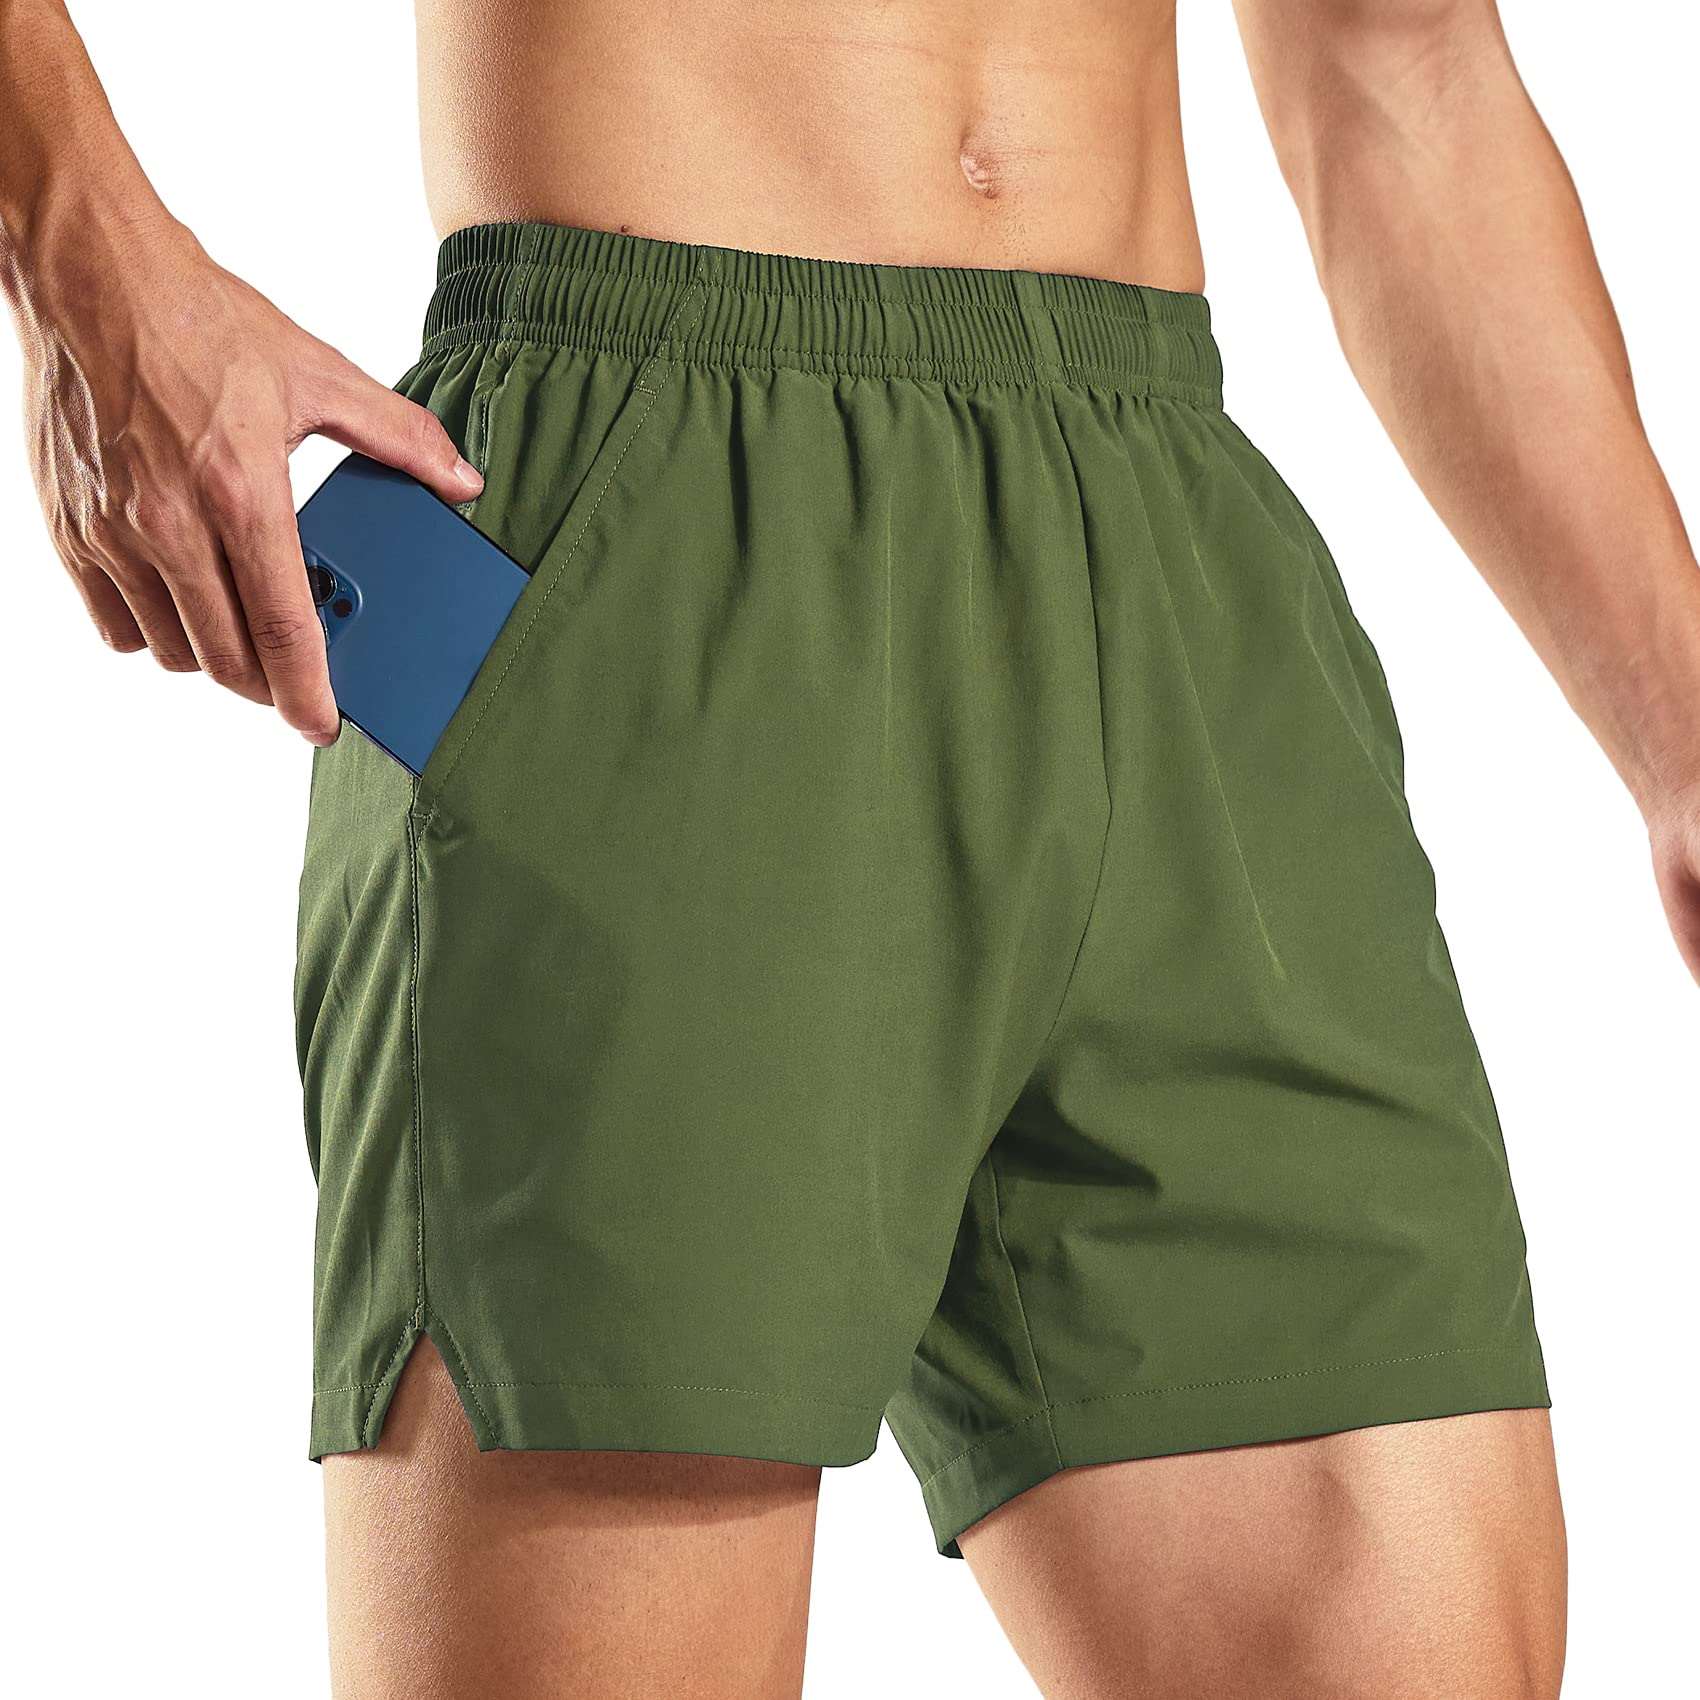 Haimont Men's Dry Fit Running Athletic Shorts with Pockets